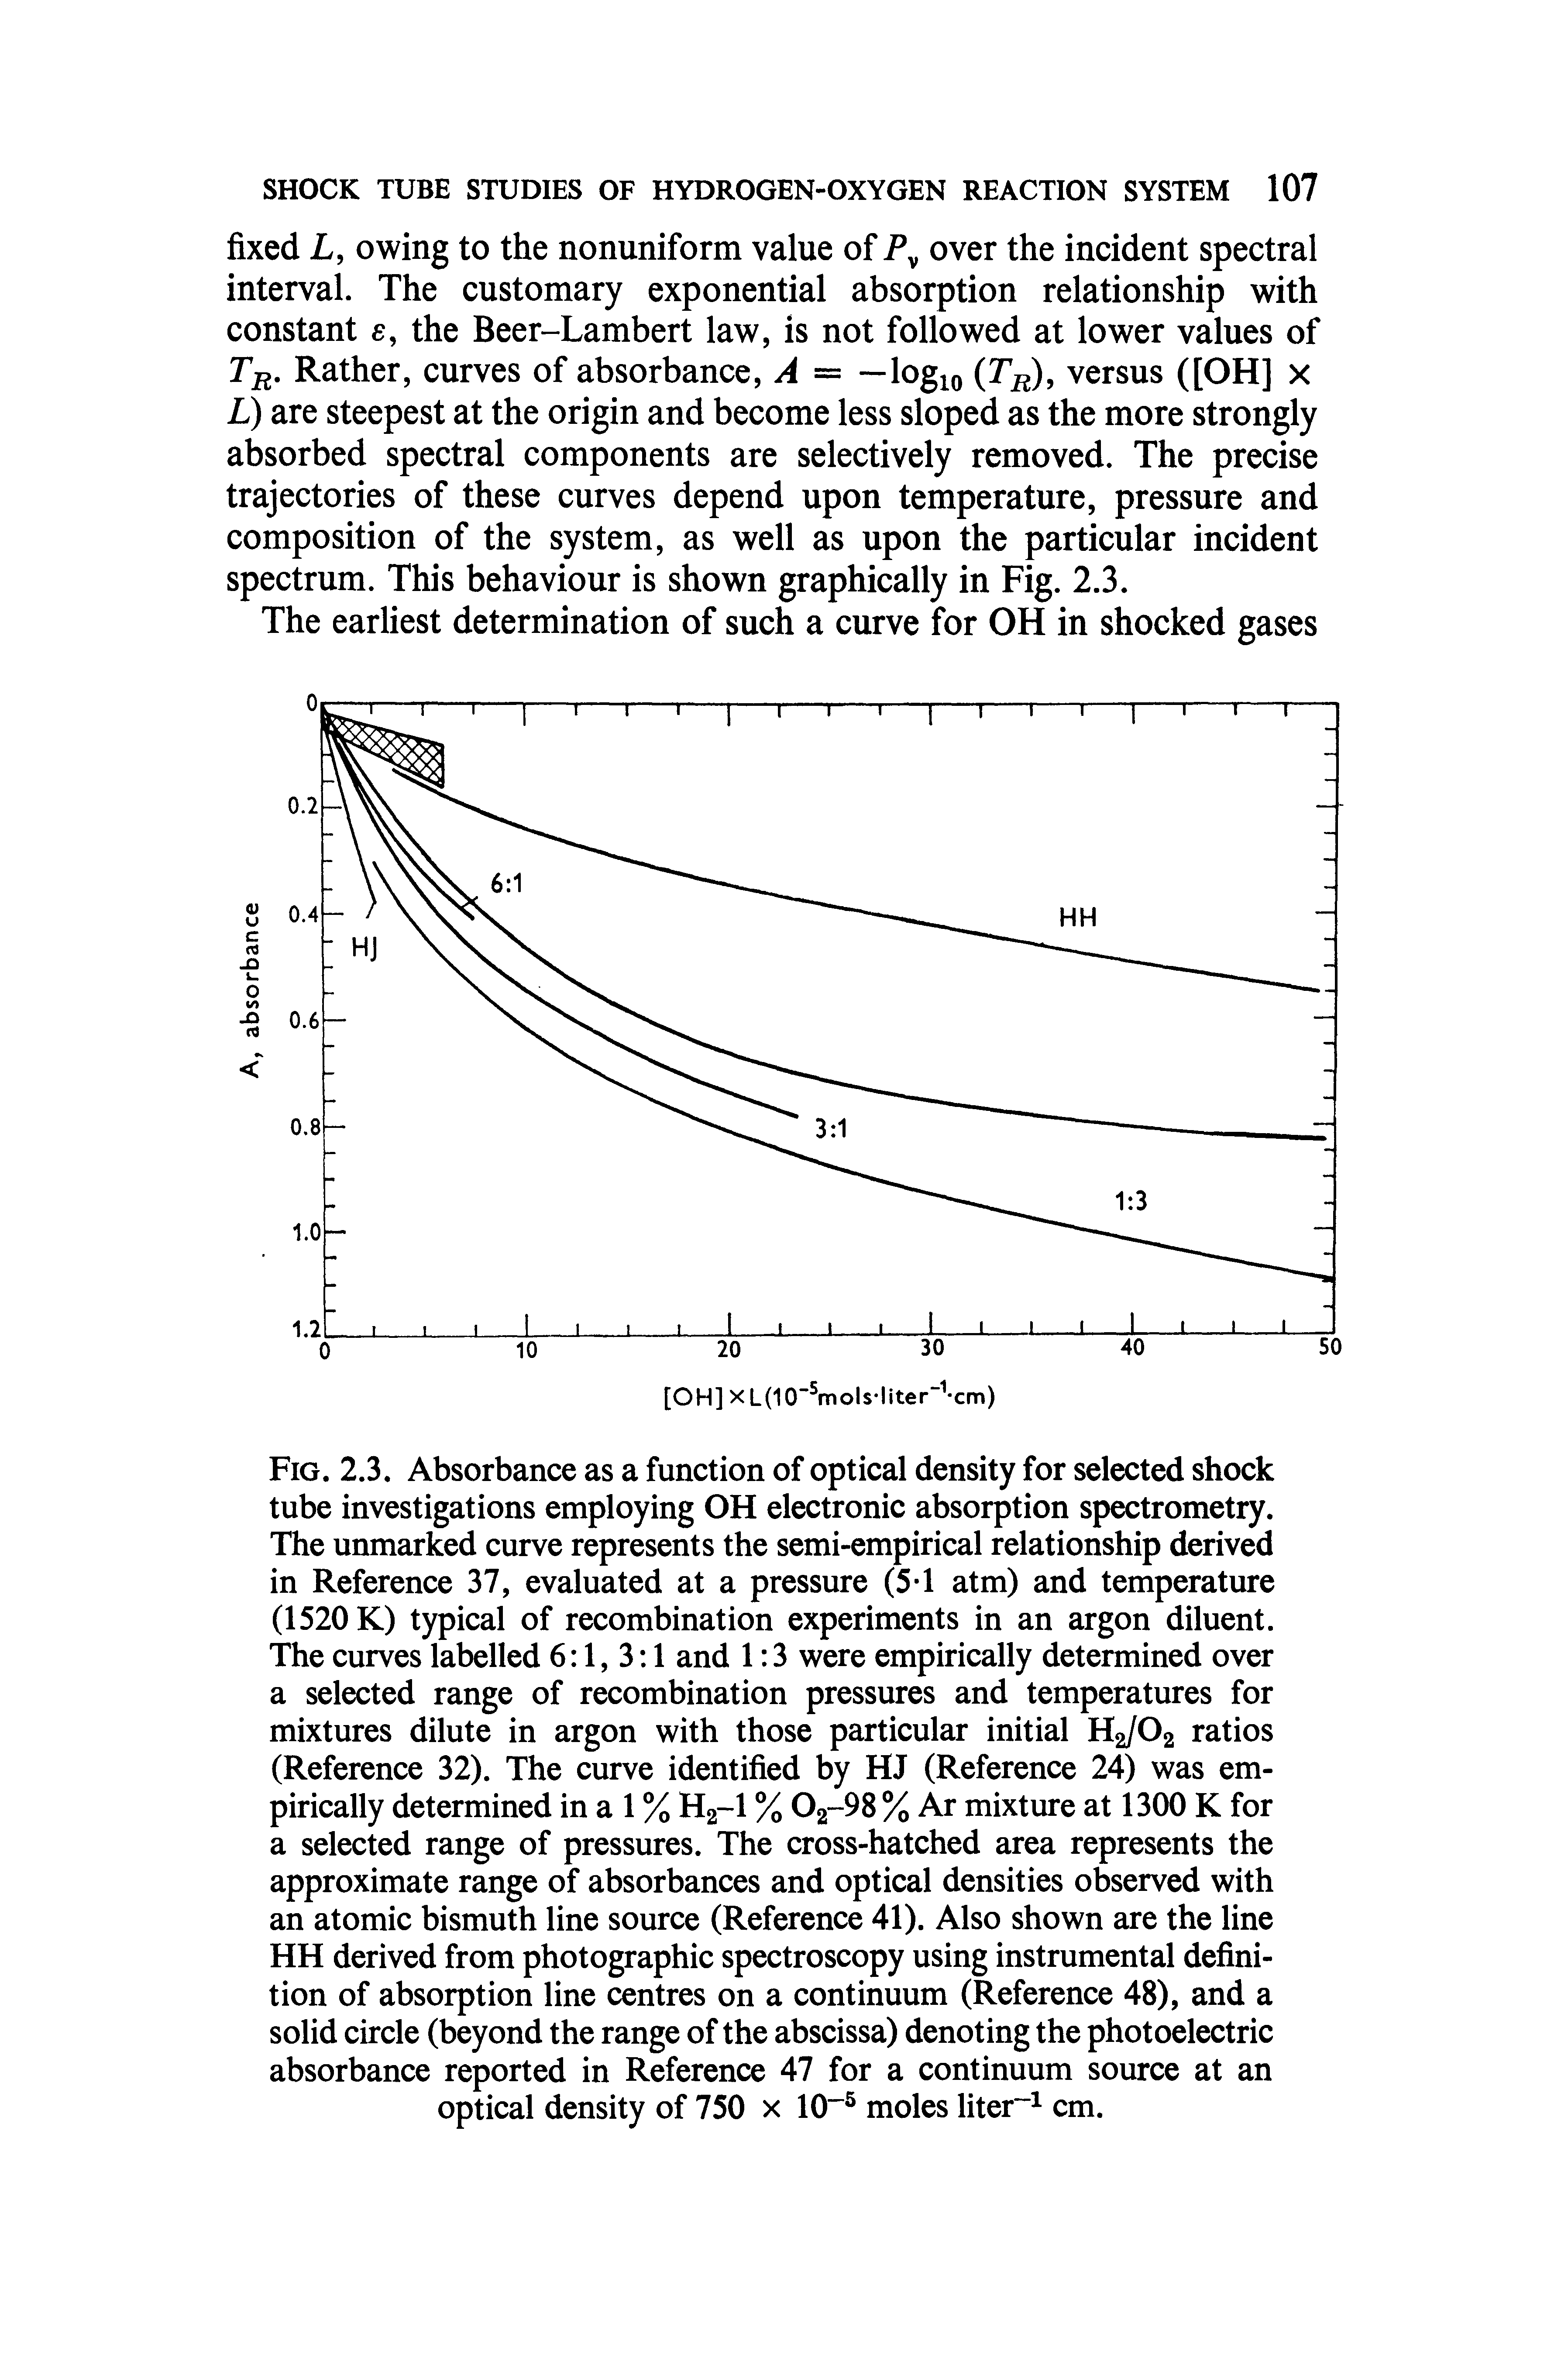 Fig. 2.3. Absorbance as a function of optical density for selected shock tube investigations employing OH electronic absorption spectrometry. The unmarked curve represents the semi-empirical relationship derived in Reference 37, evaluated at a pressure (5 1 atm) and temperature (1520 K) typical of recombination experiments in an argon diluent. Tlie curves labelled 6 1, 3 1 and 1 3 were empirically determined over a selected range of recombination pressures and temperatures for mixtures dilute in argon with those particular initial H2/O2 ratios (Reference 32). The curve identified by HJ (Reference 24) was empirically determined in a 1 % Hg-l % 02-98 % Ar mixture at 1300 K for a selected range of pressures. The cross-hatched area represents the approximate range of absorbances and optical densities observed with an atomic bismuth line source (Reference 41). Also shown are the line HH derived from photographic spectroscopy using instrumental definition of absorption line centres on a continuum (Reference 48), and a solid circle (beyond the range of the abscissa) denoting the photoelectric absorbance reported in Reference 47 for a continuum source at an optical density of 750 x 10" moles liter cm.